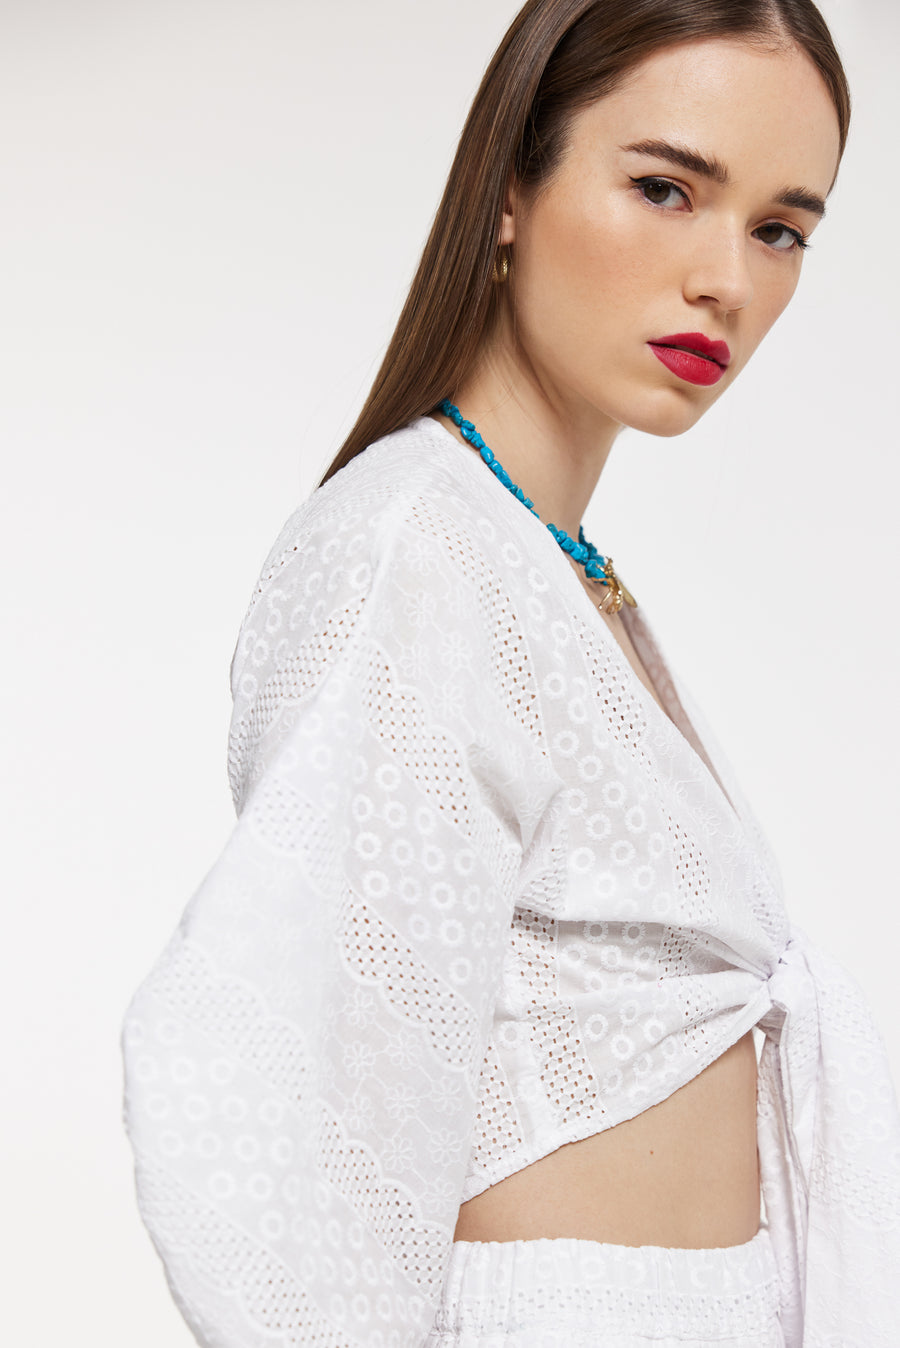 Melina Top (White lace)